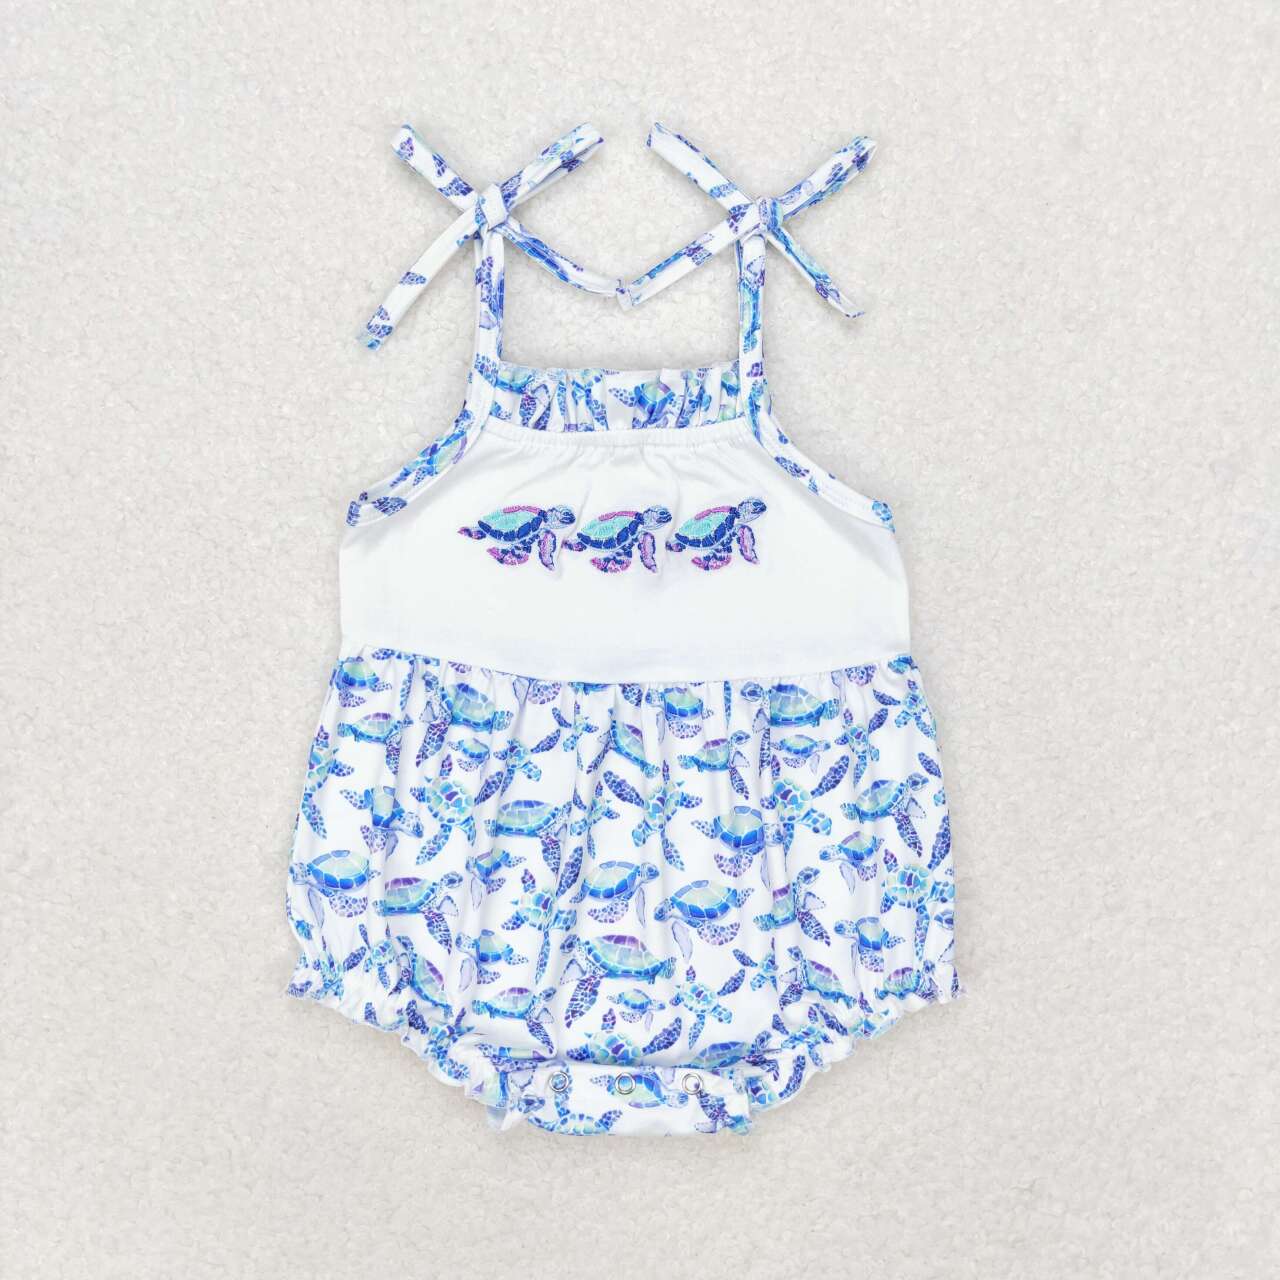 Sea Turtle Embroidery Blue Print Sibling Summer Matching Clothes